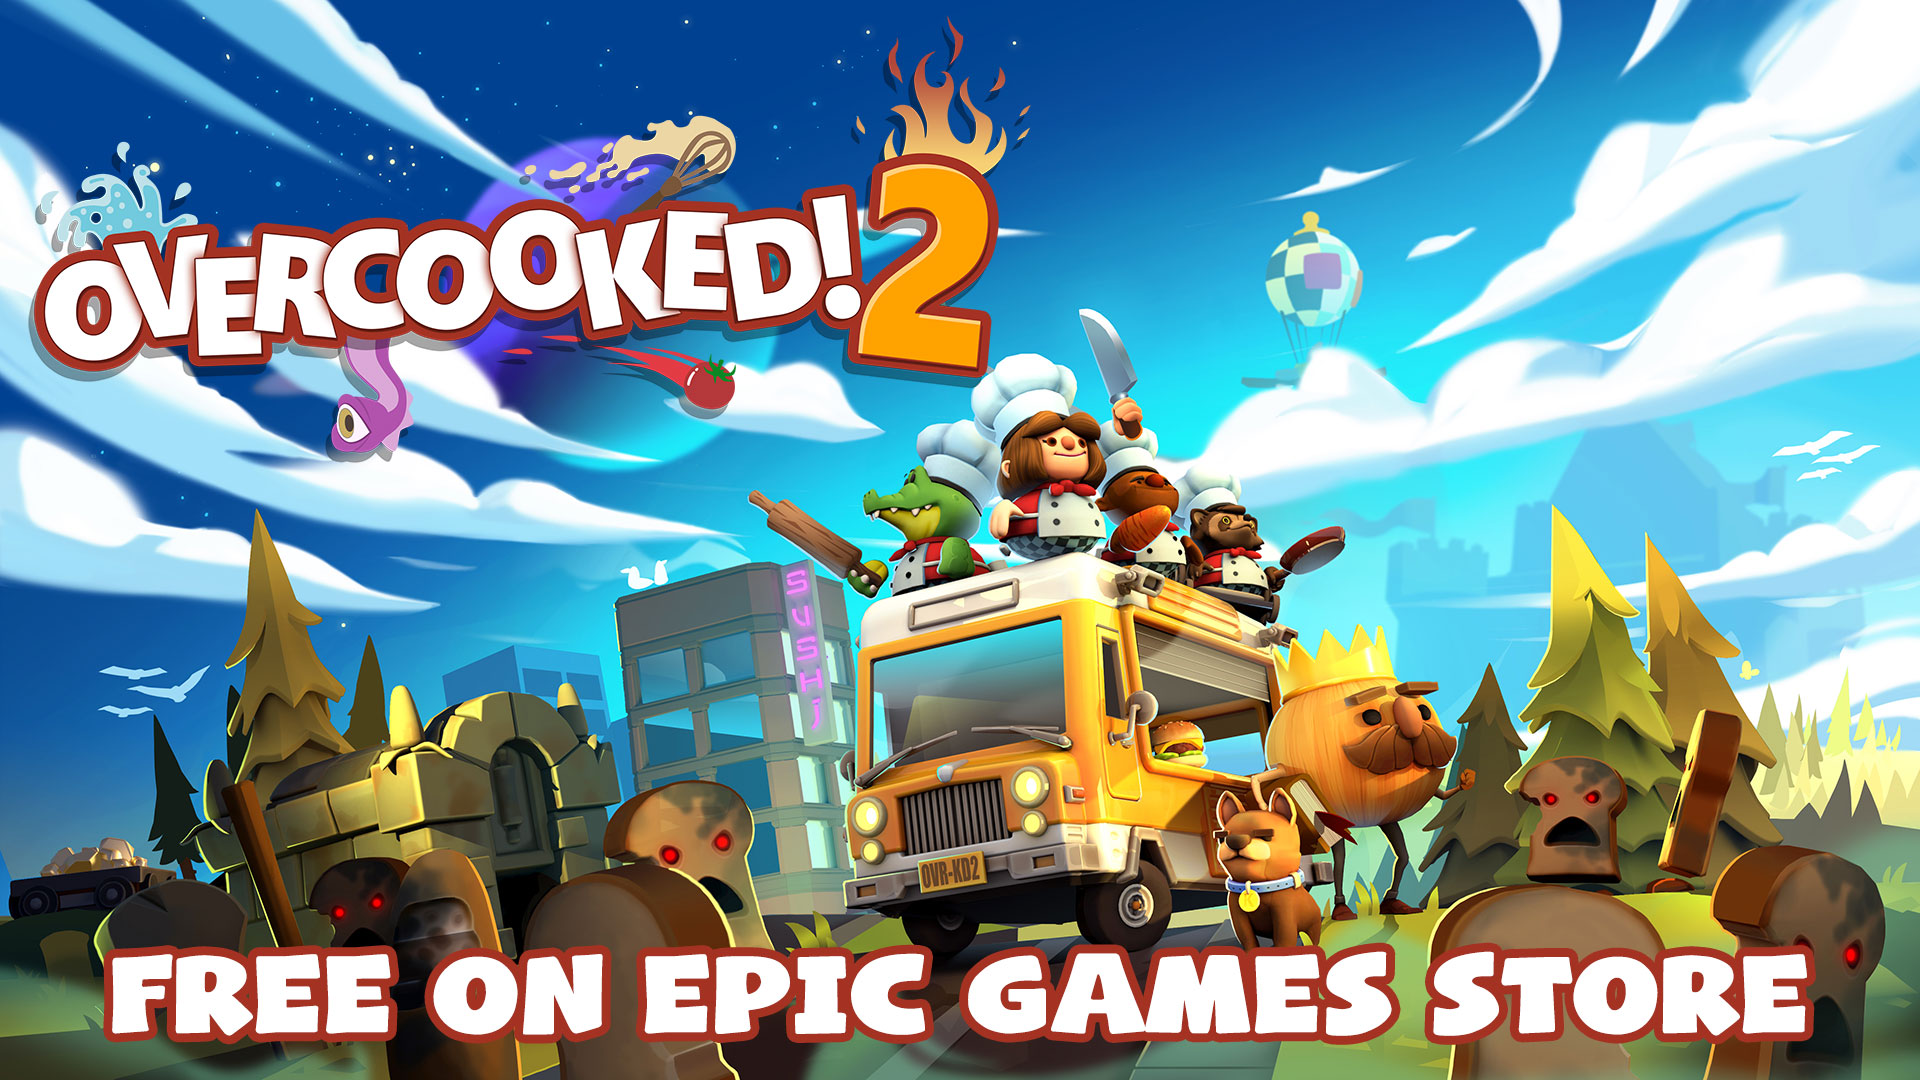 Thanksgiving undergrundsbane instans Overcooked! 2 – Free on Epic Games and PC Crossplay Patch - Team17 Digital  LTD - The Spirit Of Independent Games